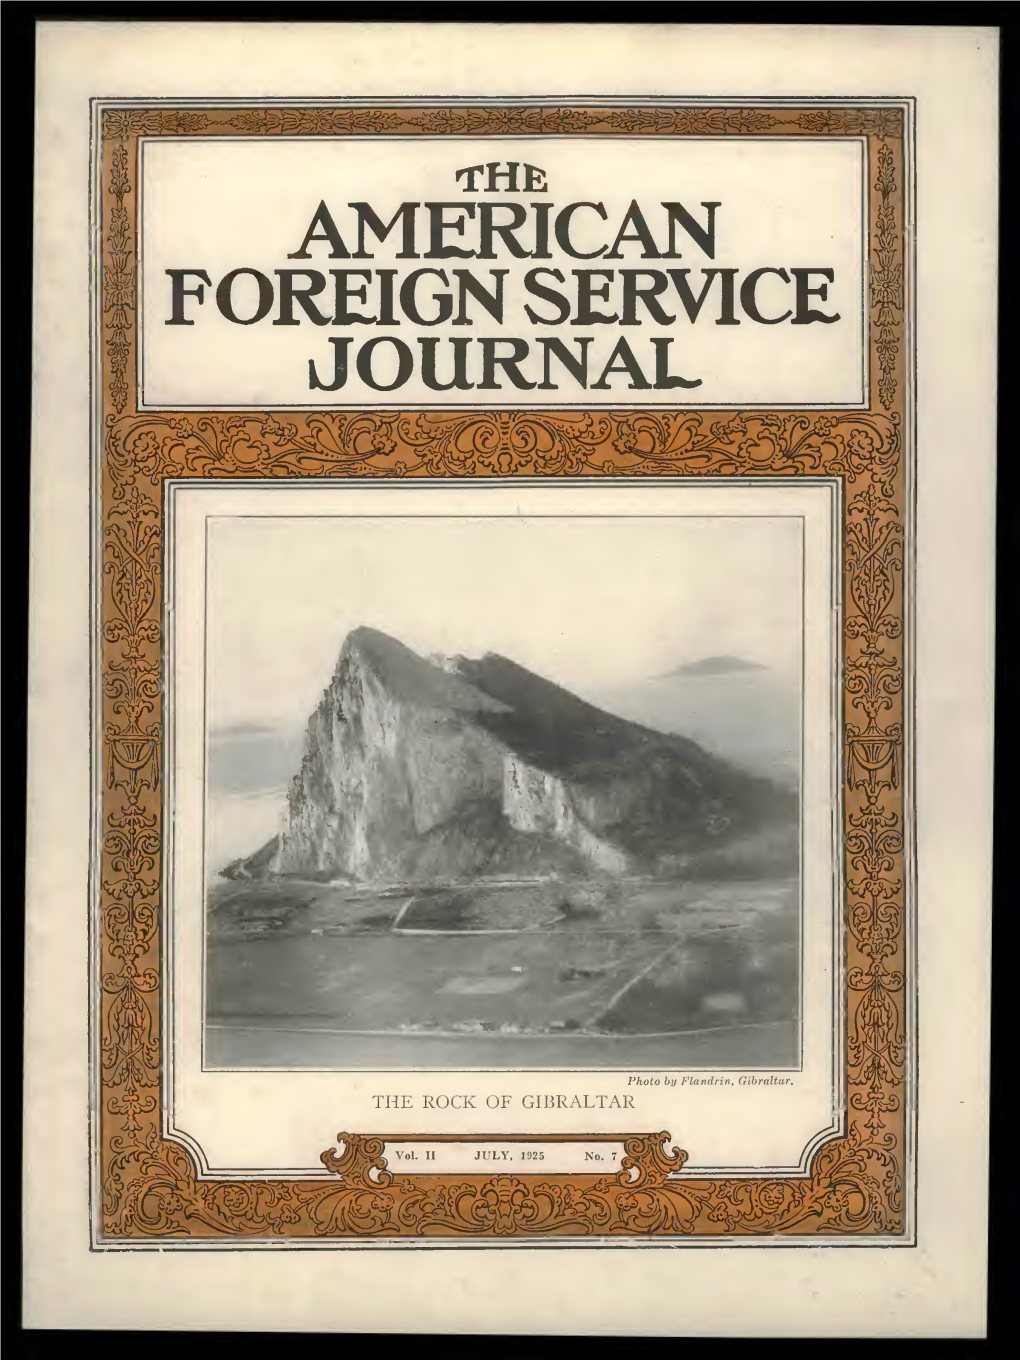 The Foreign Service Journal, July 1925